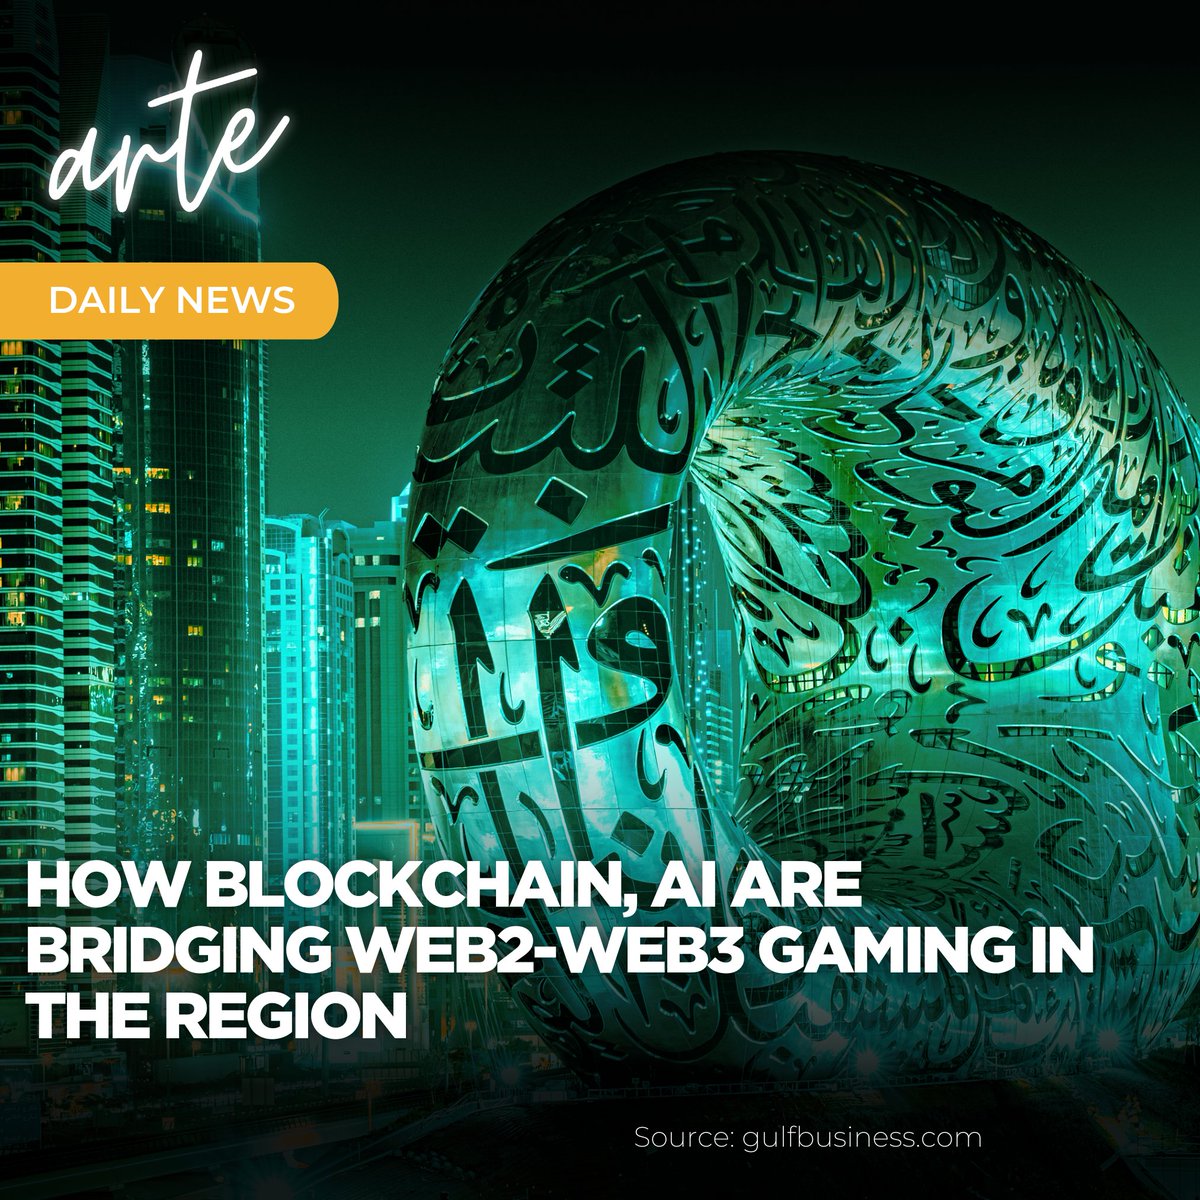 📢 arte Daily News

Global video games market to hit $360B by 2027, surpassing music and movies combined. #MENA region sees accelerated growth, driven by disposable income and mobile #gaming. 

tinyurl.com/mrwwtkk7

@GulfBusiness